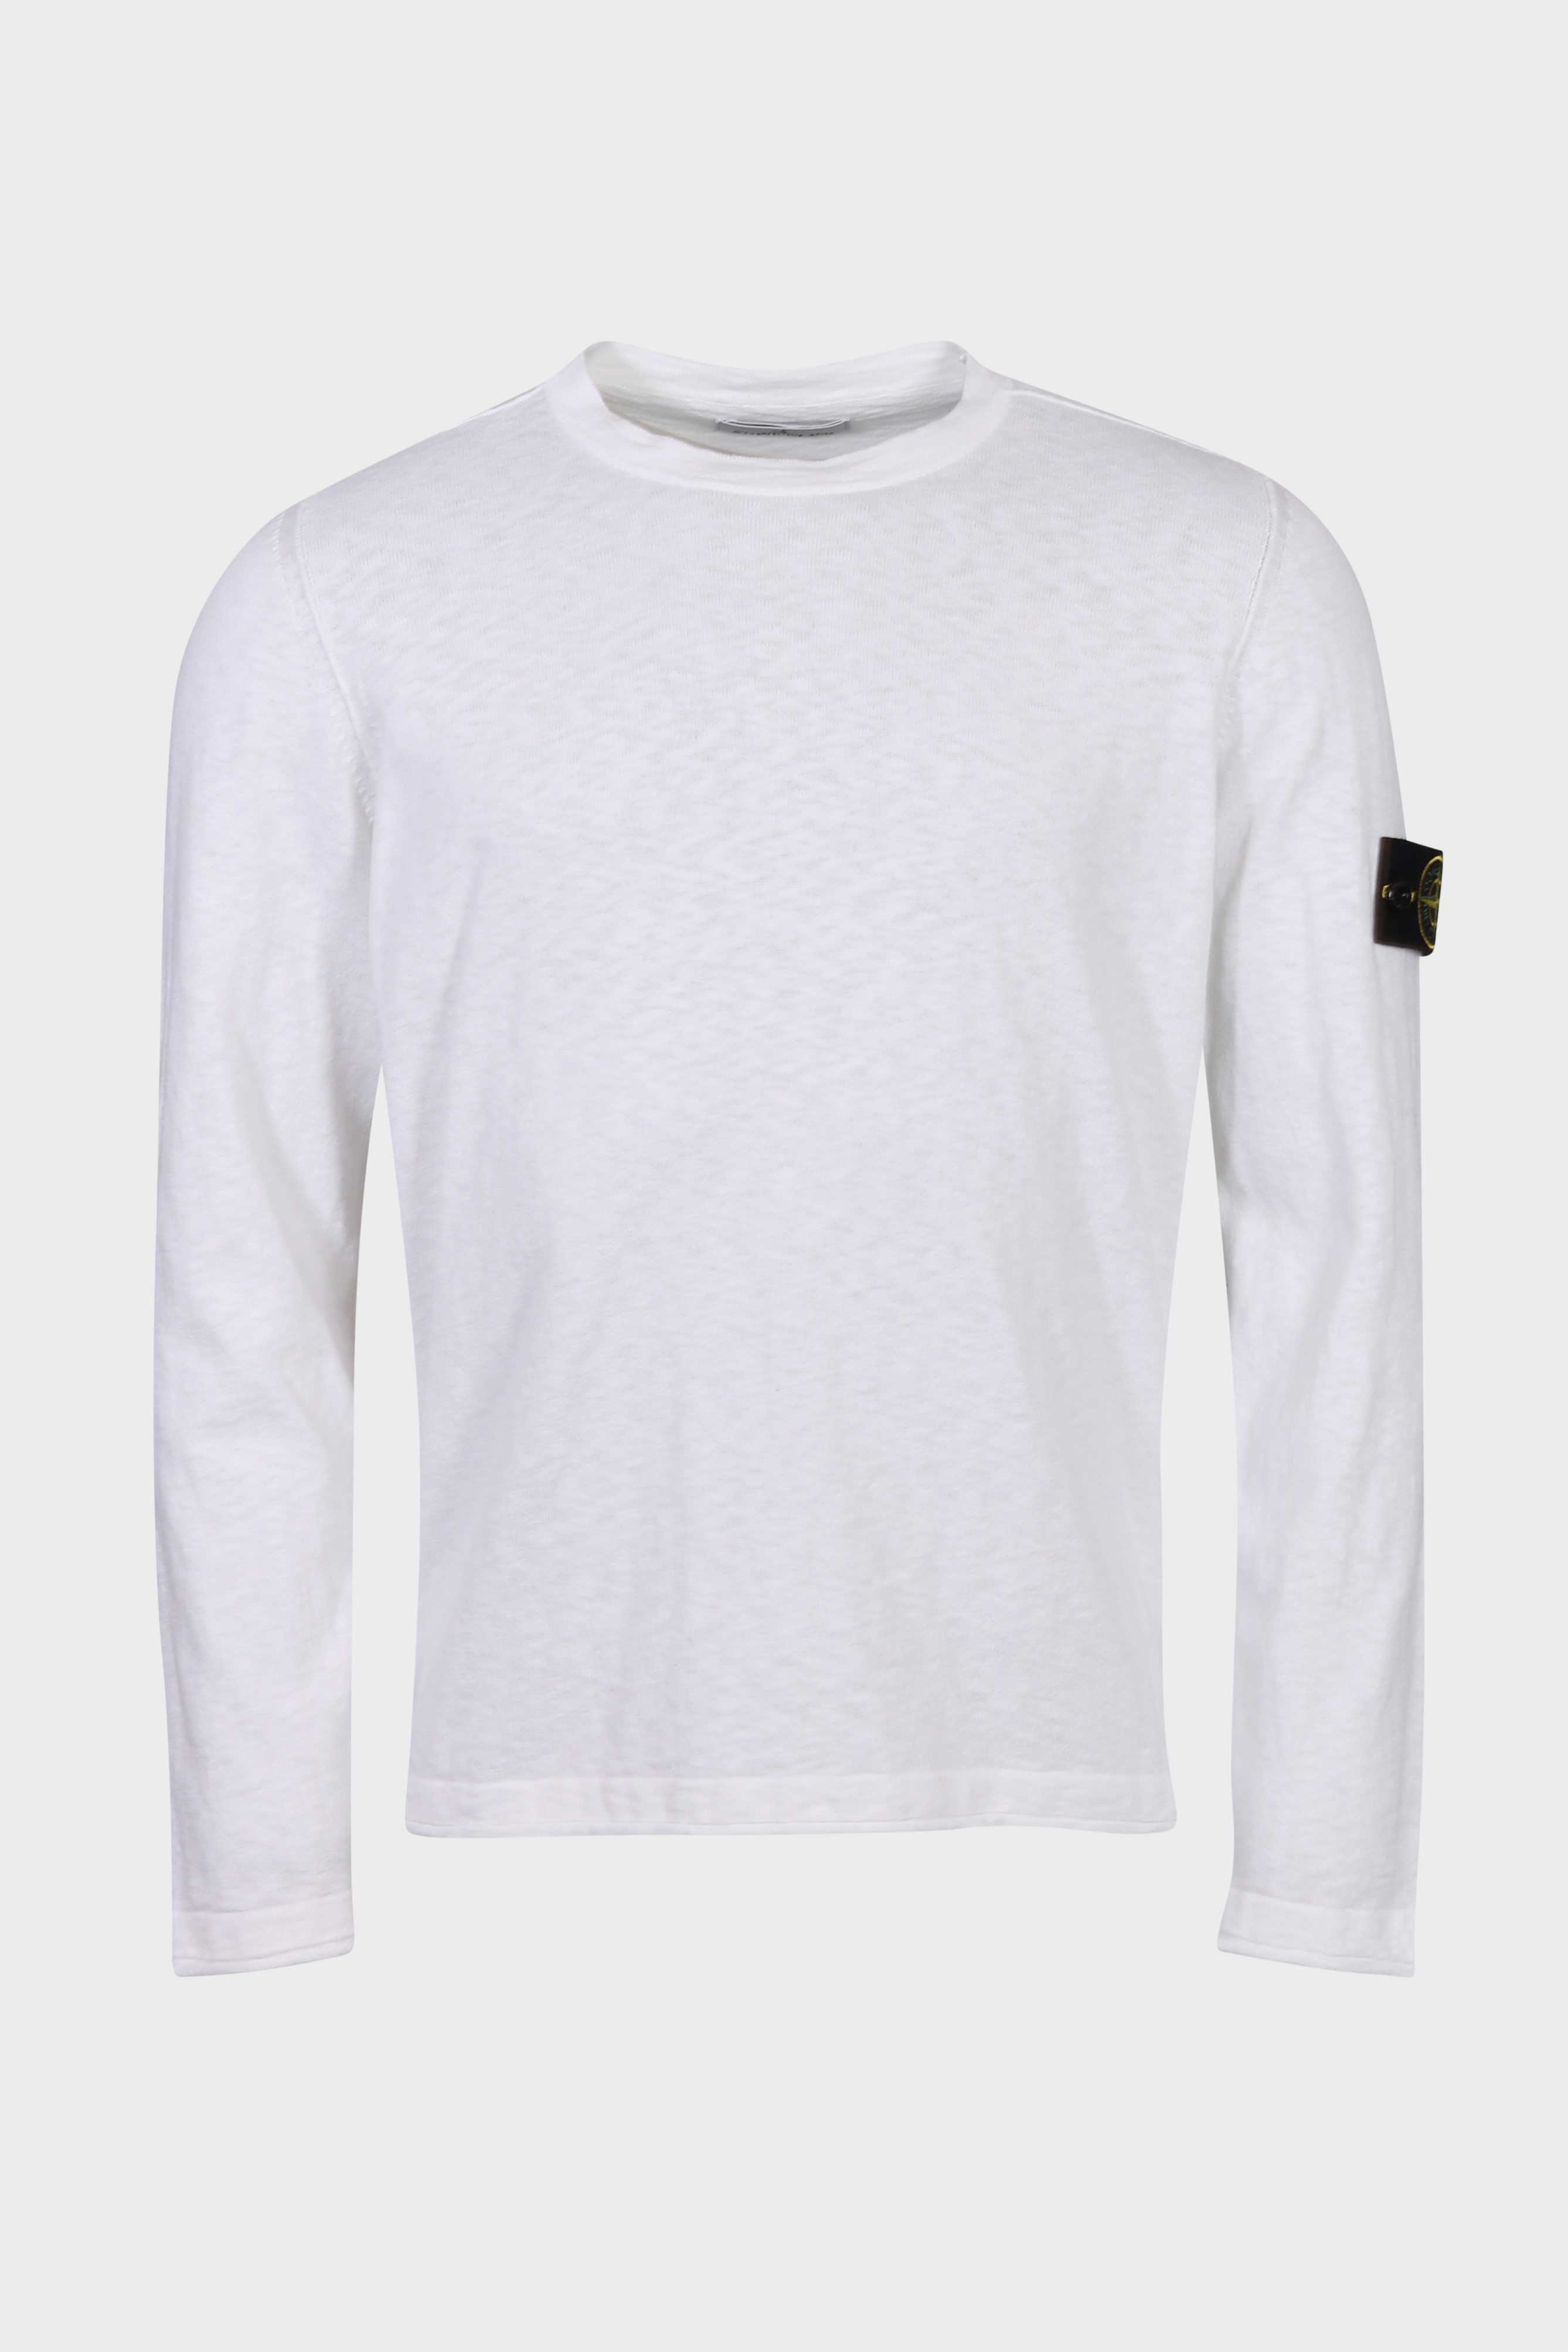 STONE ISLAND Summer Knit Pullover in White M